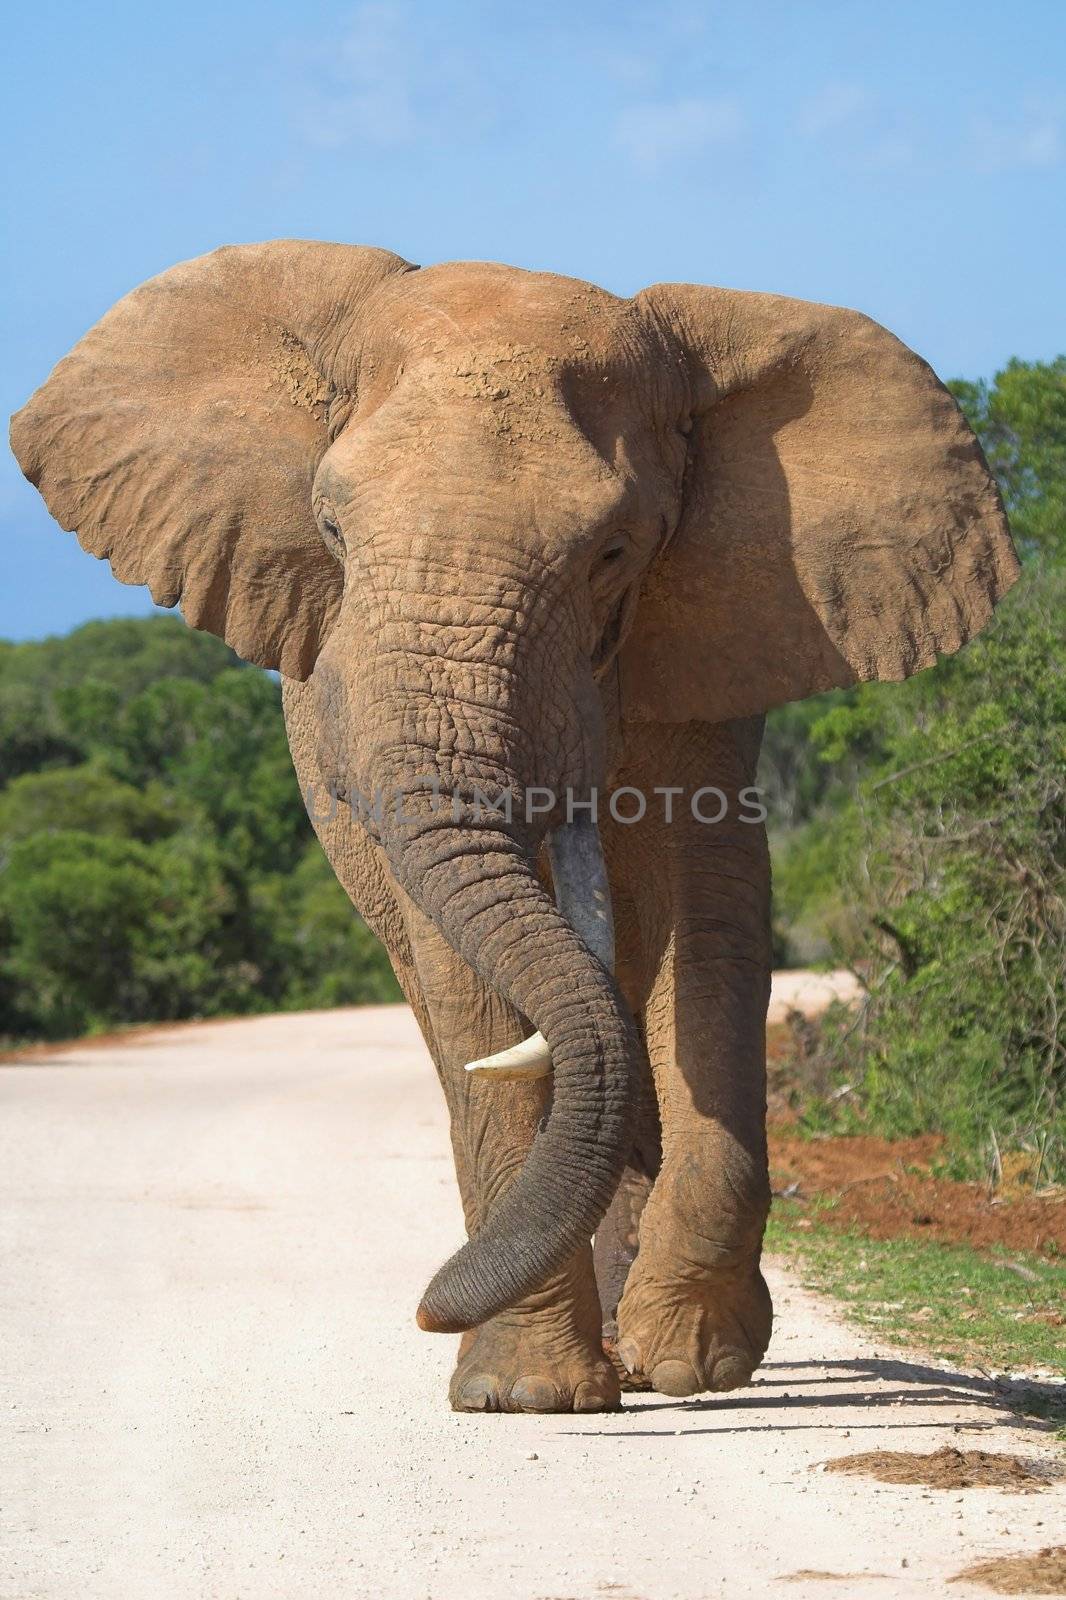 African Elephant playing with its trunk over a lonesome tusk